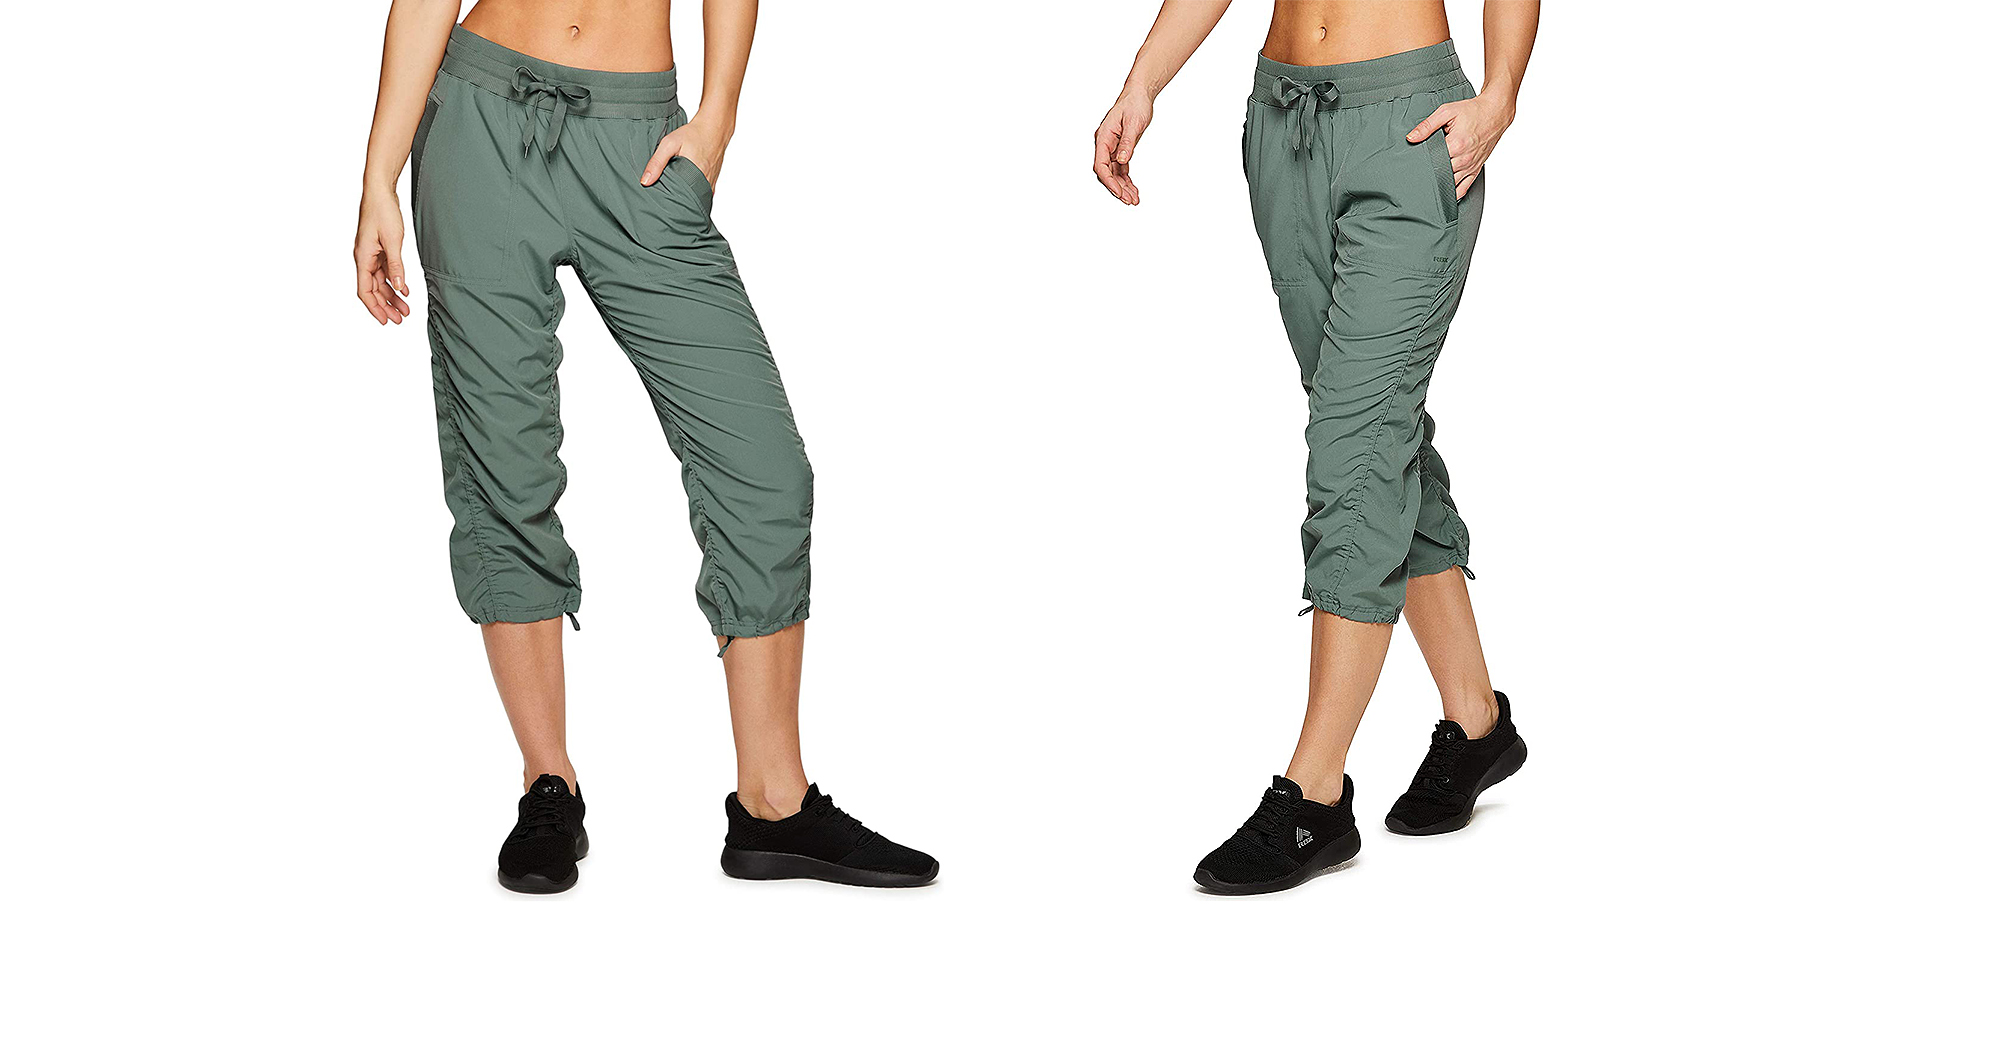 How to Wear Capri Pants and Cropped Trousers